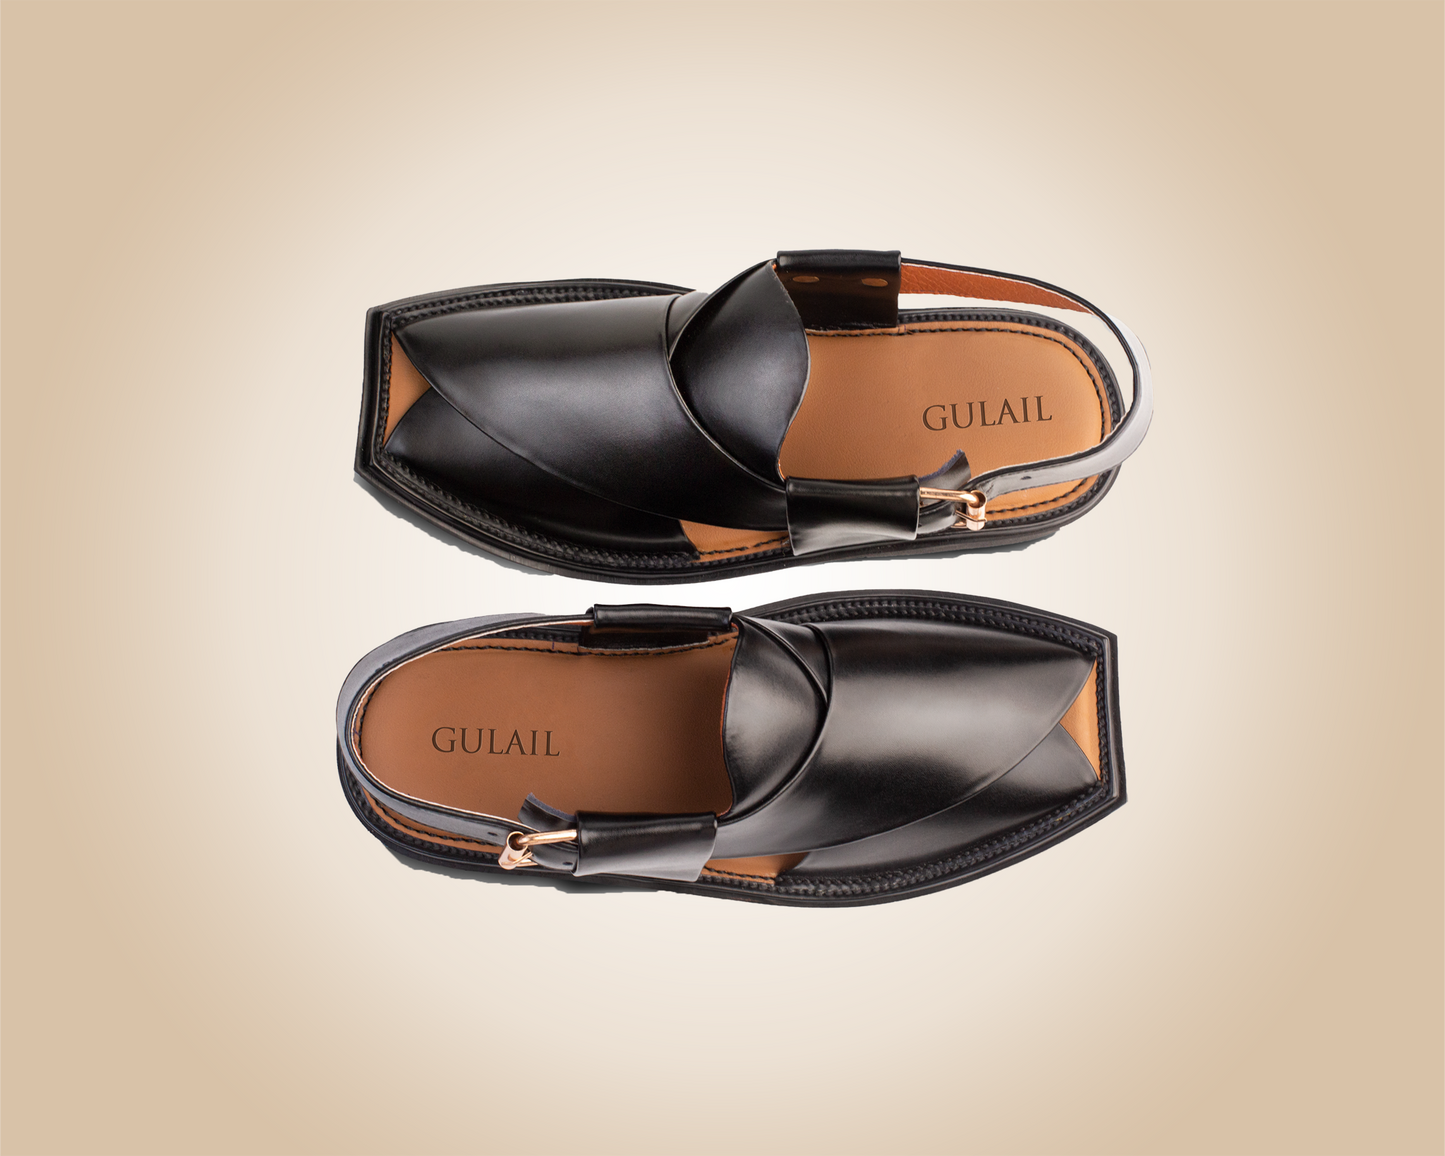 "Cut Jet Black Saplay sandals, known as Peshawari Chappal, featuring traditional leather craftsmanship."